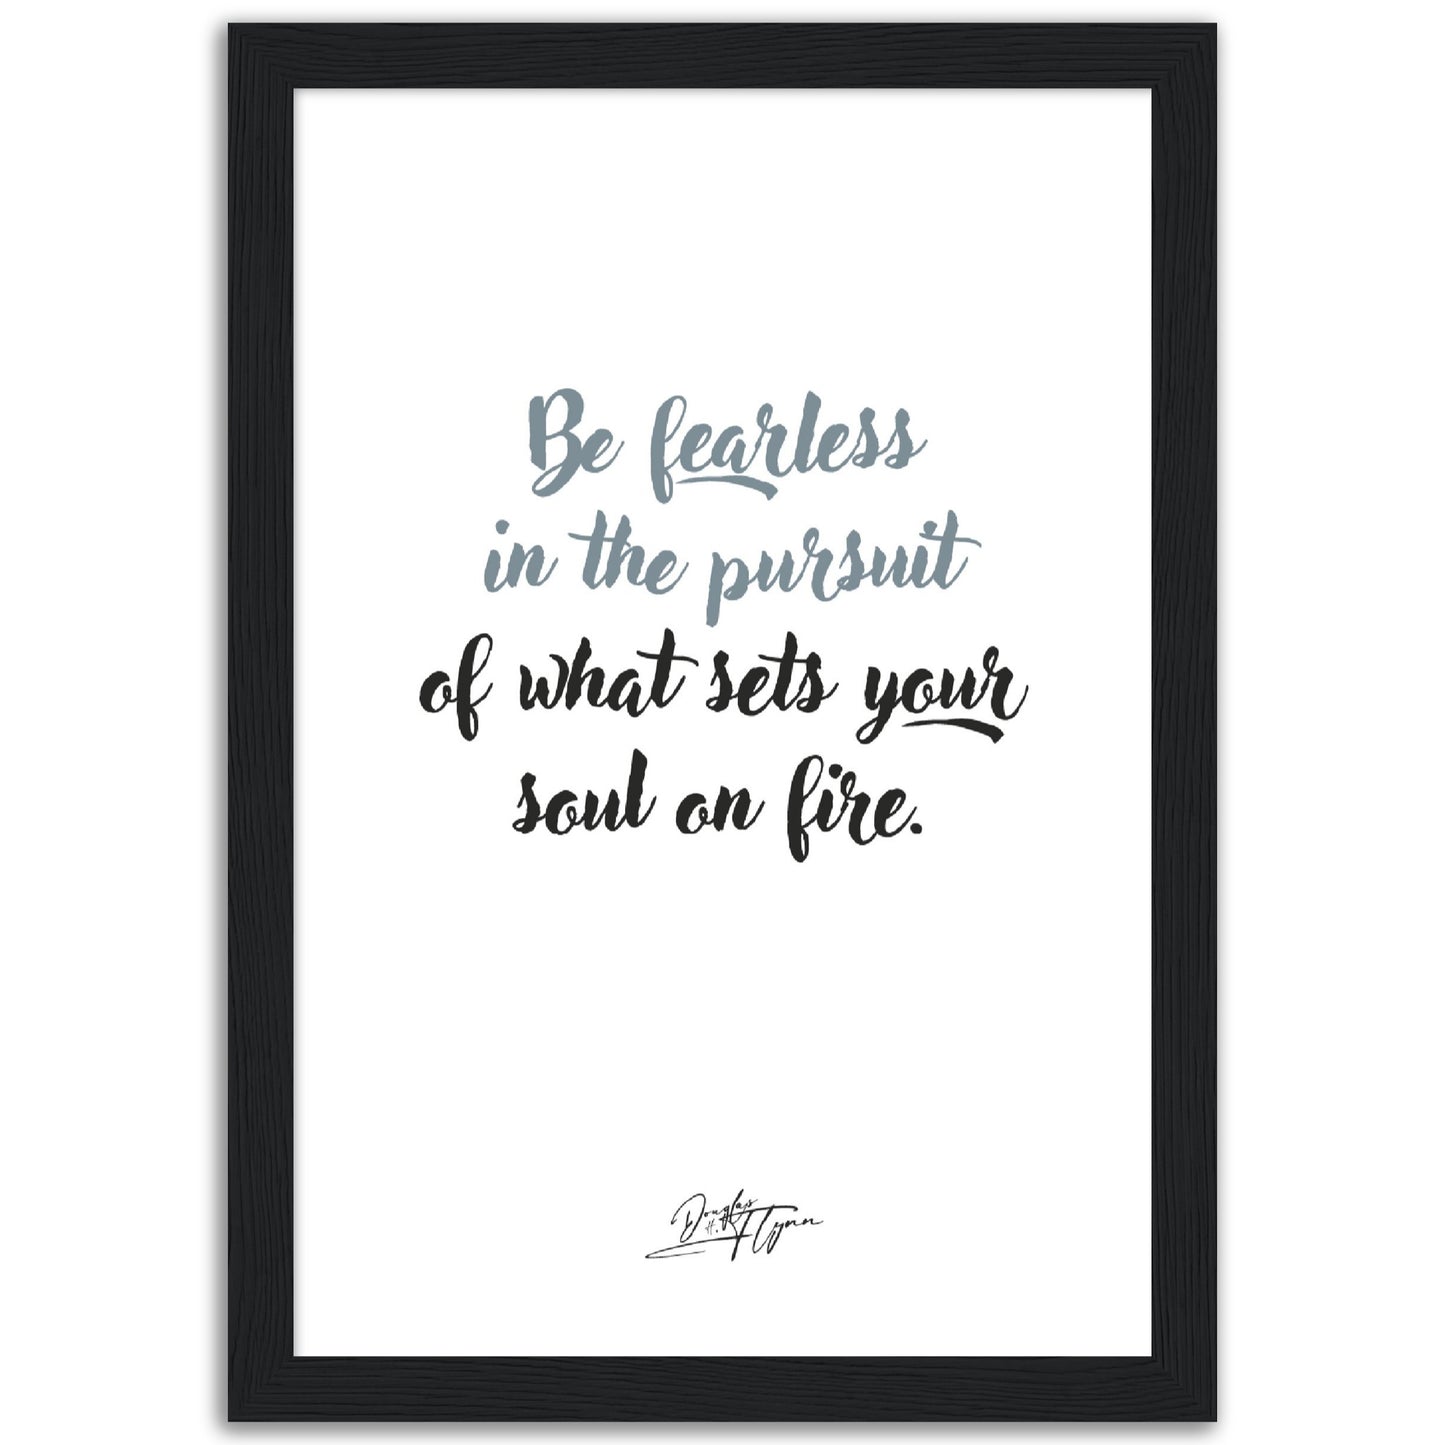 »Be fearless«